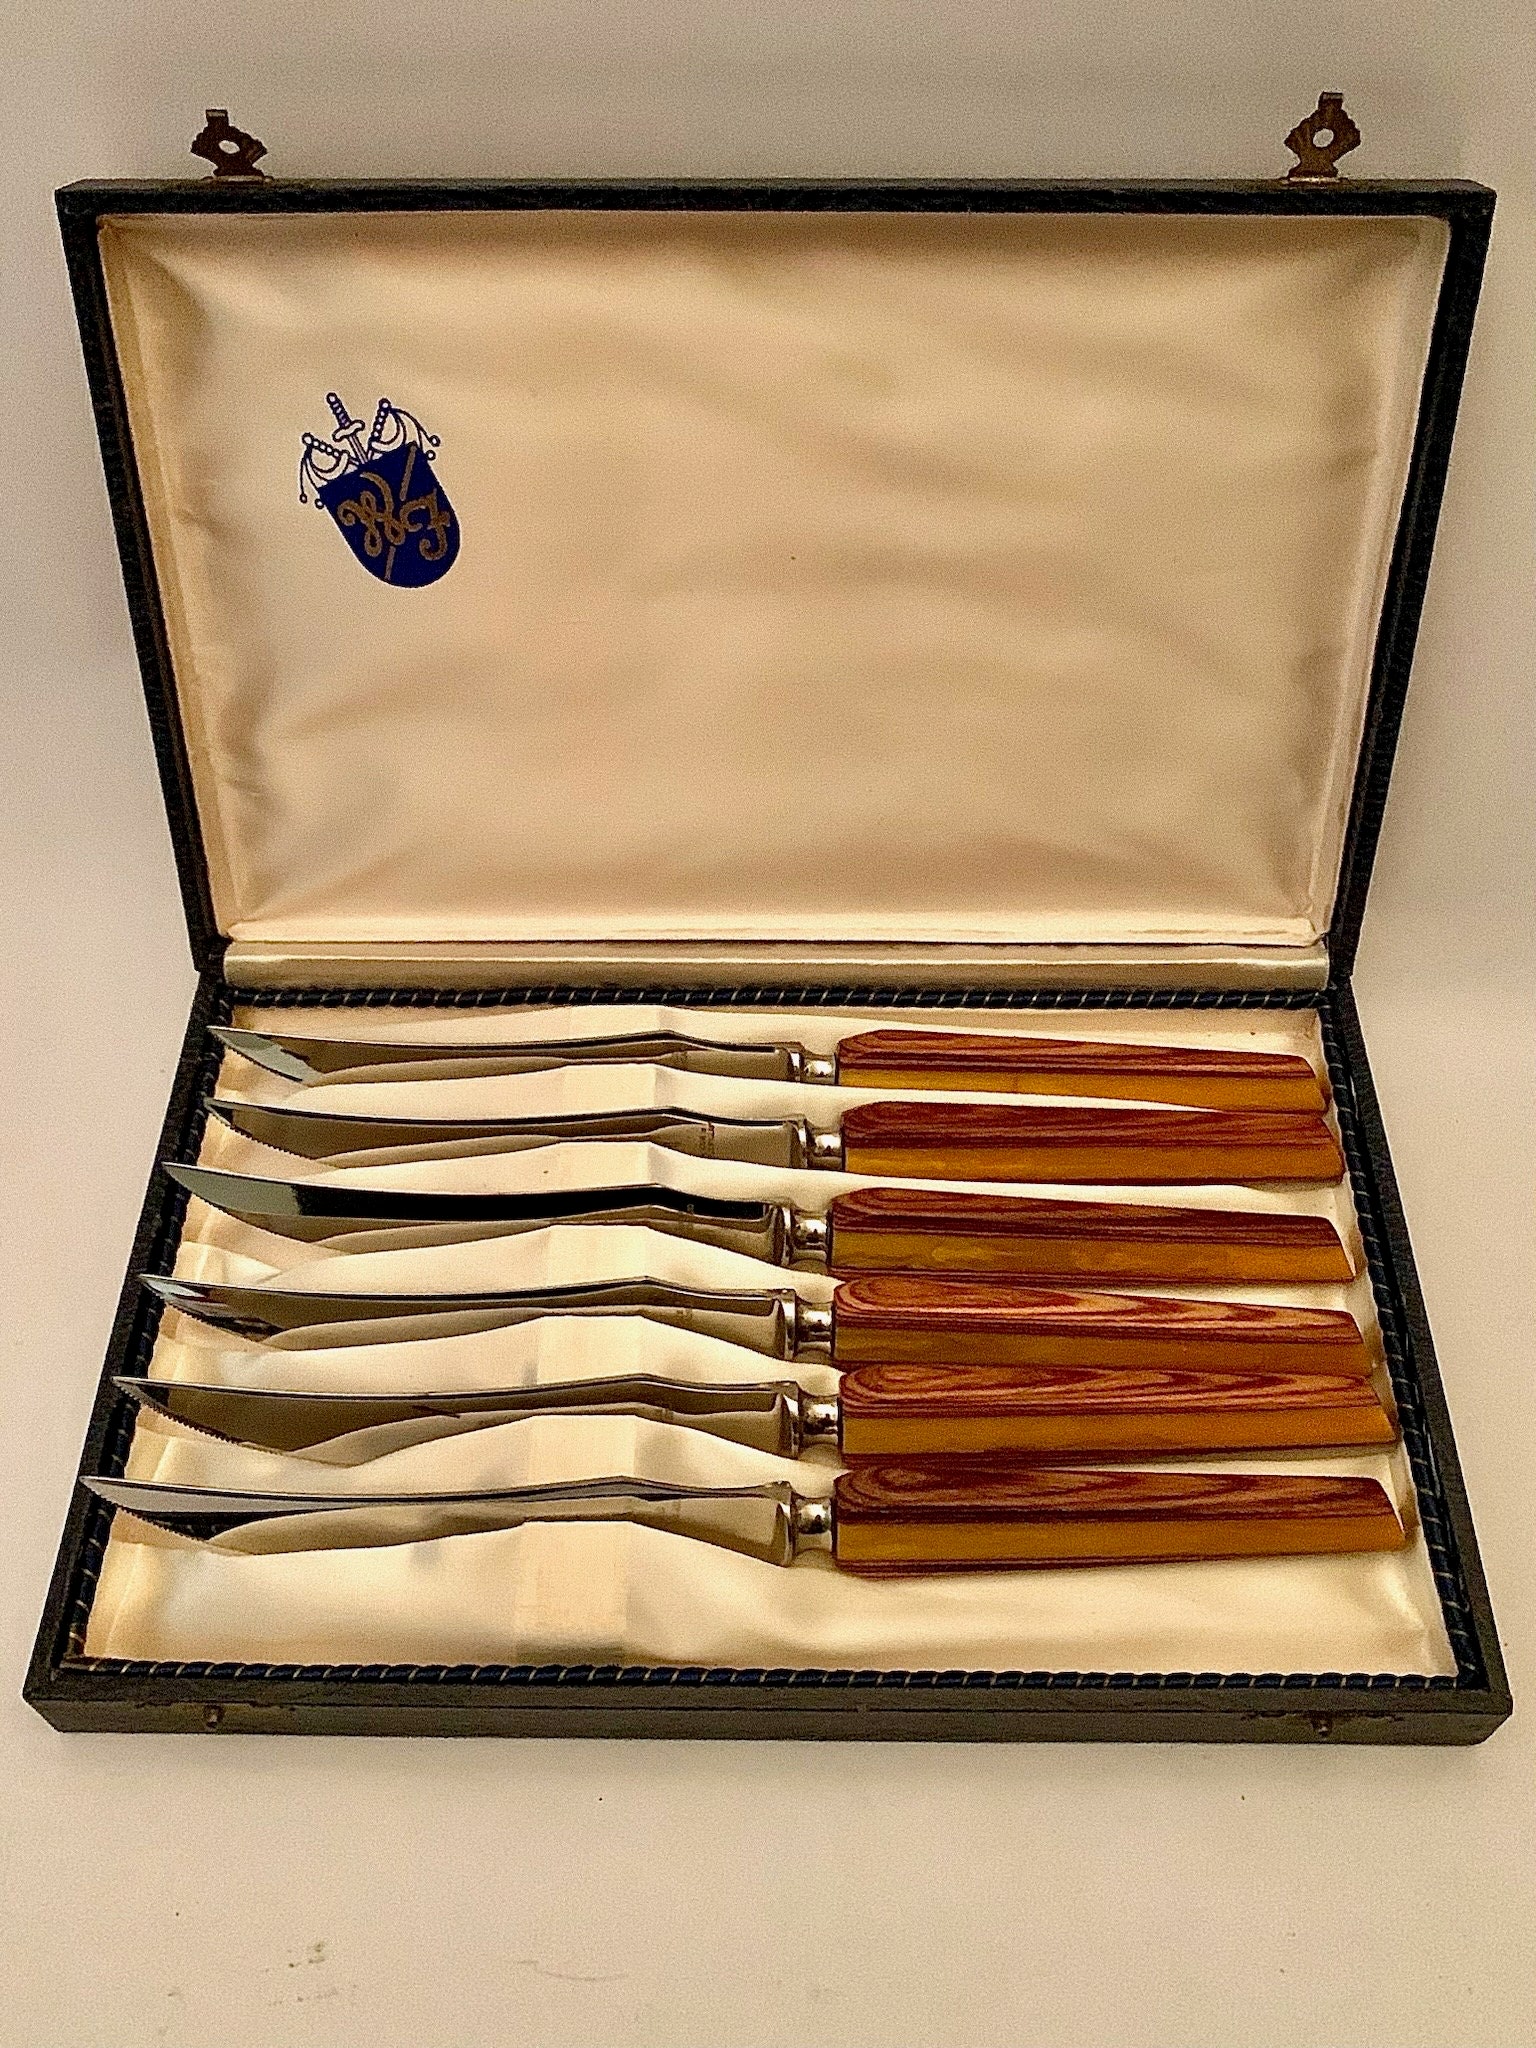 Laguiole California Steak Knives - 6 Piece Rosewood Set - Ergonomic Handles  - Stored in a California Oakwood Gift Box - Extremely Sharp Straight Steel